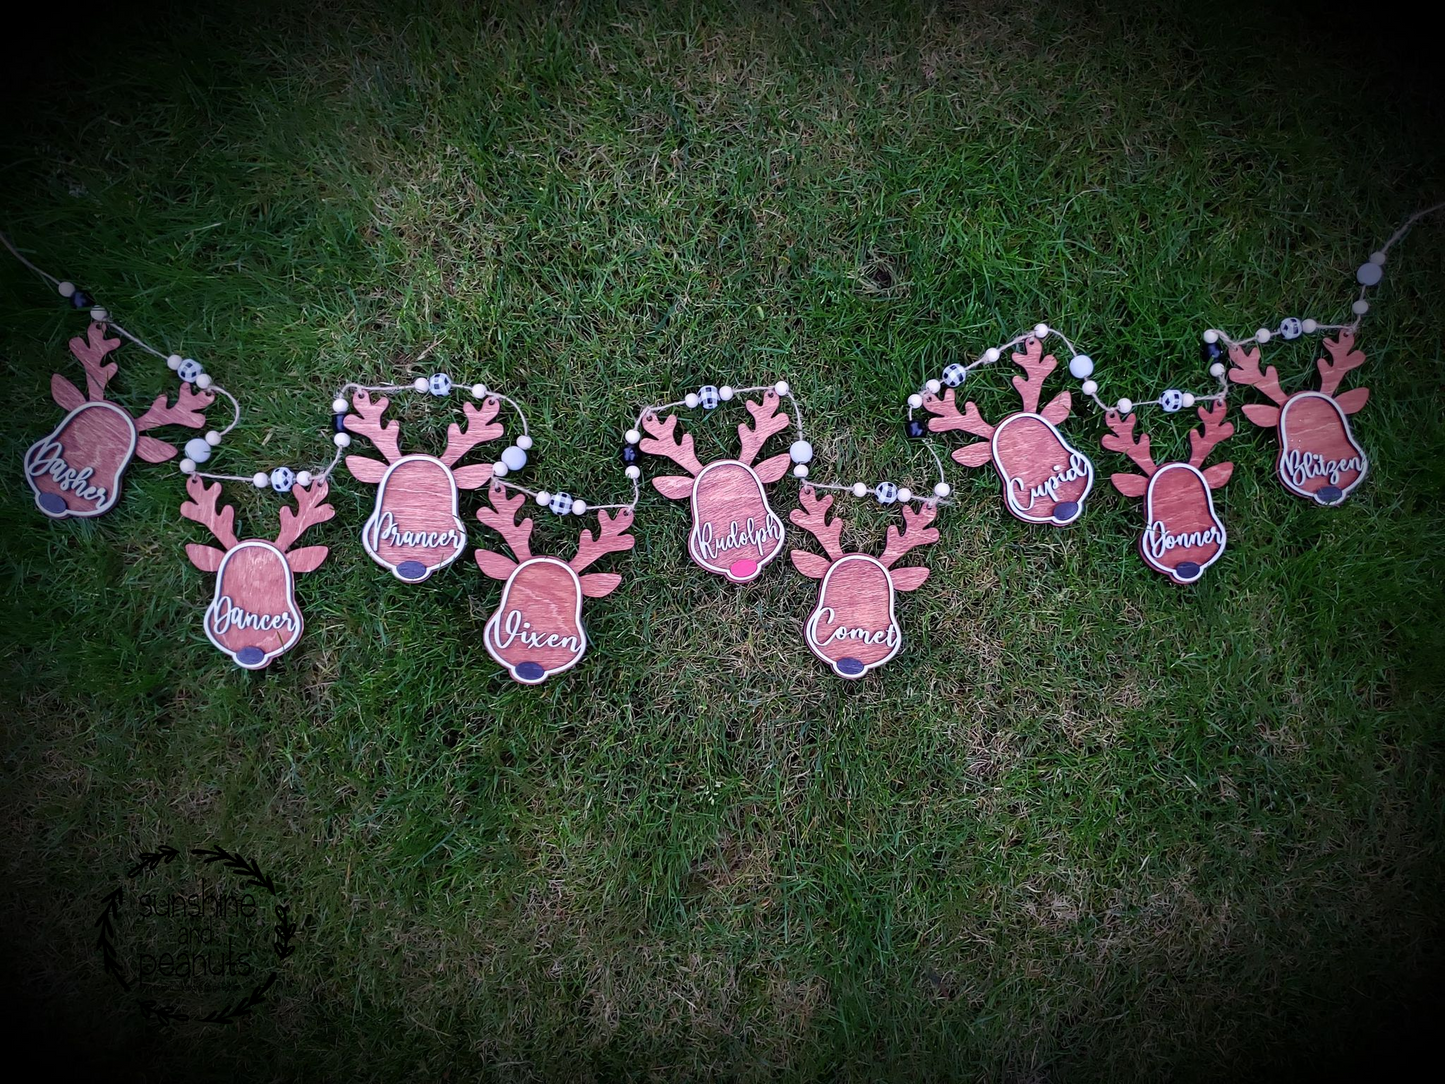 Our Reindeer Garland/Banner is a must-have for your holiday decorations! Featuring nine of Santa's famous reindeer - Dasher, Dancer, Prancer, Vixen, Comet, Cupid, Donner, Blitzen and Rudolph - this 6.5' garland includes black, white, and buffalo check beads on a jute strand. Crafted with birch wood and stained in cherry and maple, this garland will bring festive cheer to any home. Order yours today and complete the set with our Reindeer ornaments and Wreath Sign!